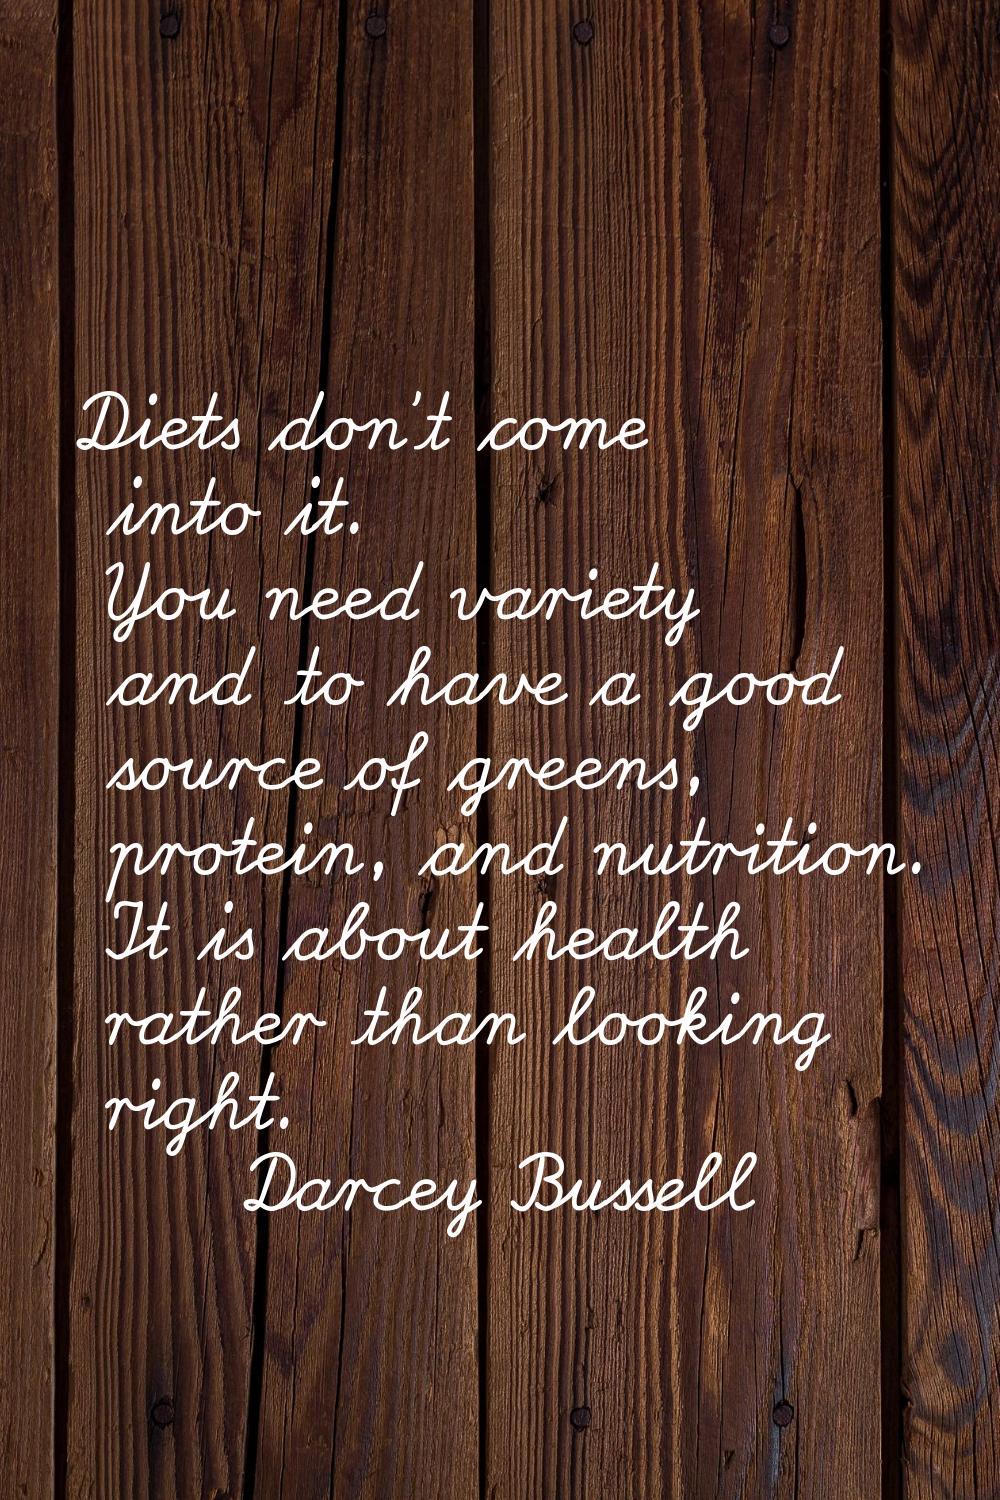 Diets don't come into it. You need variety and to have a good source of greens, protein, and nutrit